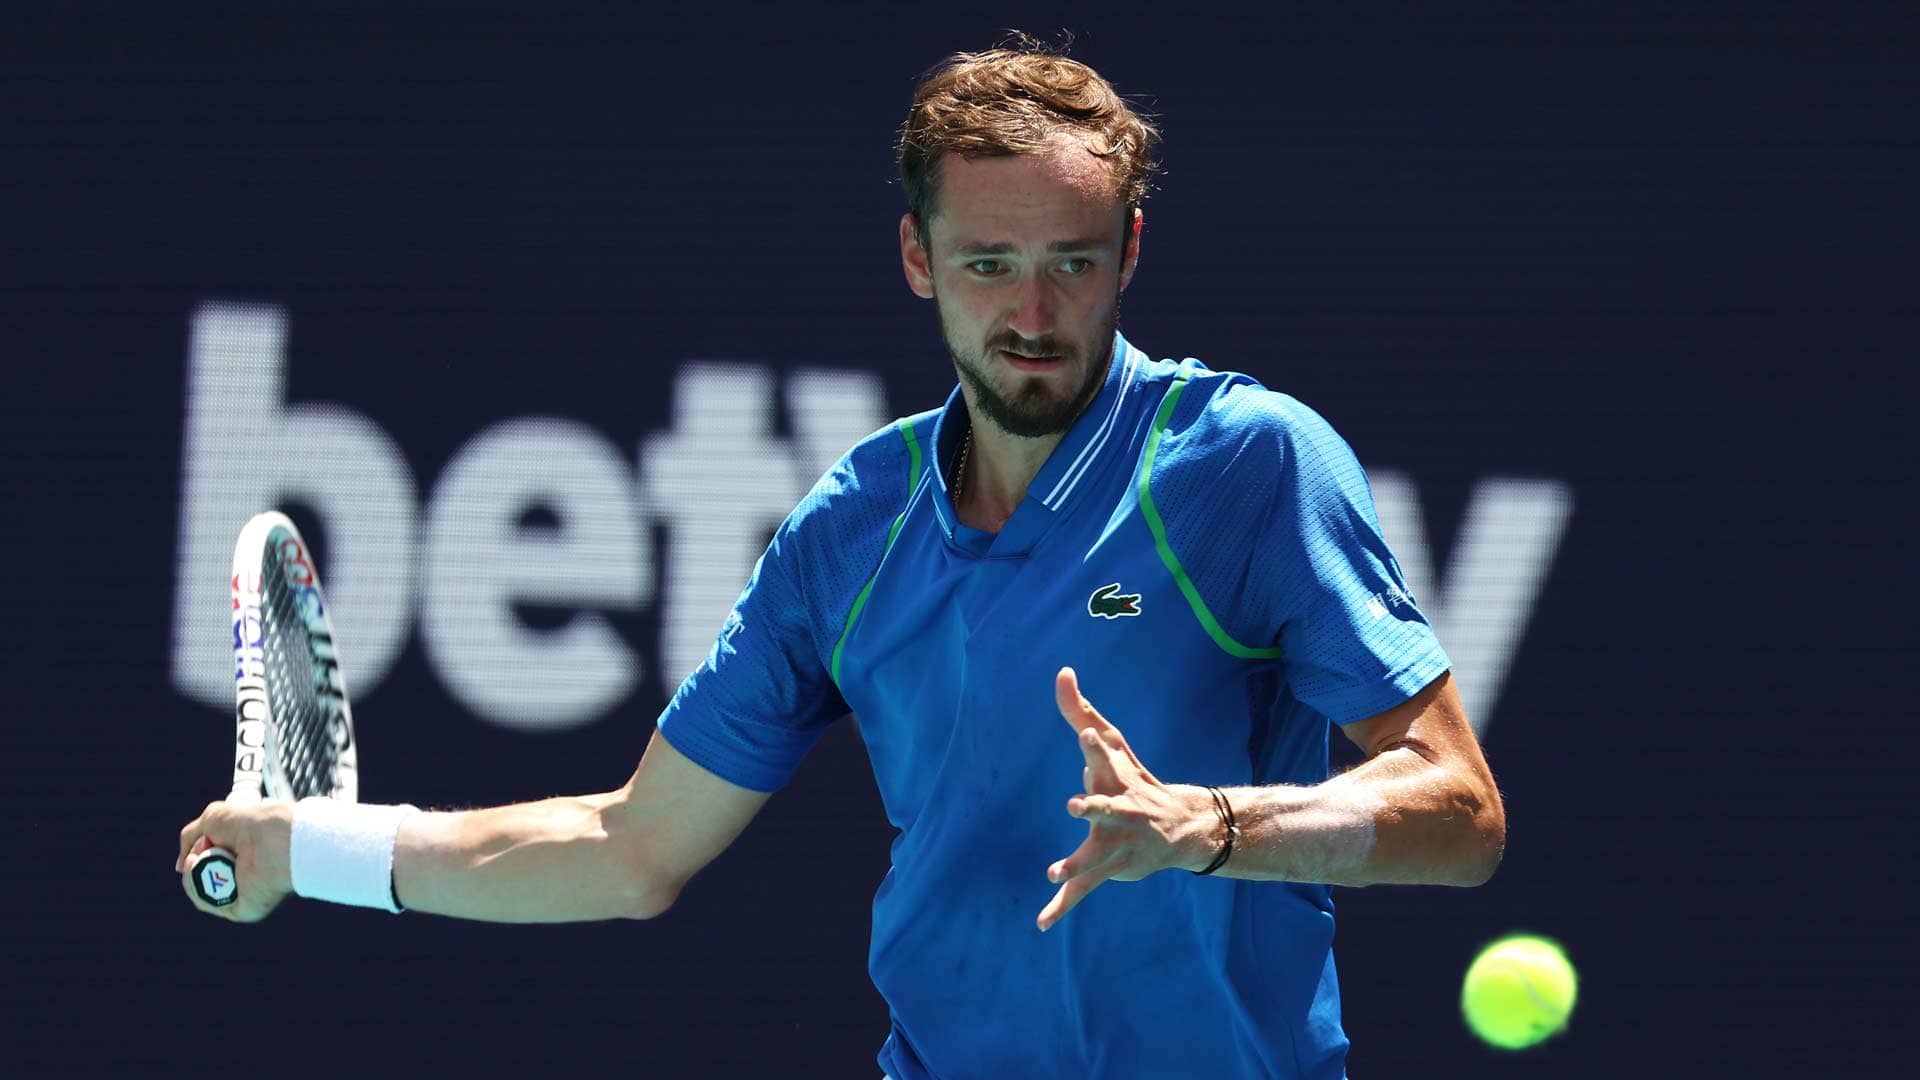 Daniil Medvedev wins his 19th career tour-level title and his first Miami.